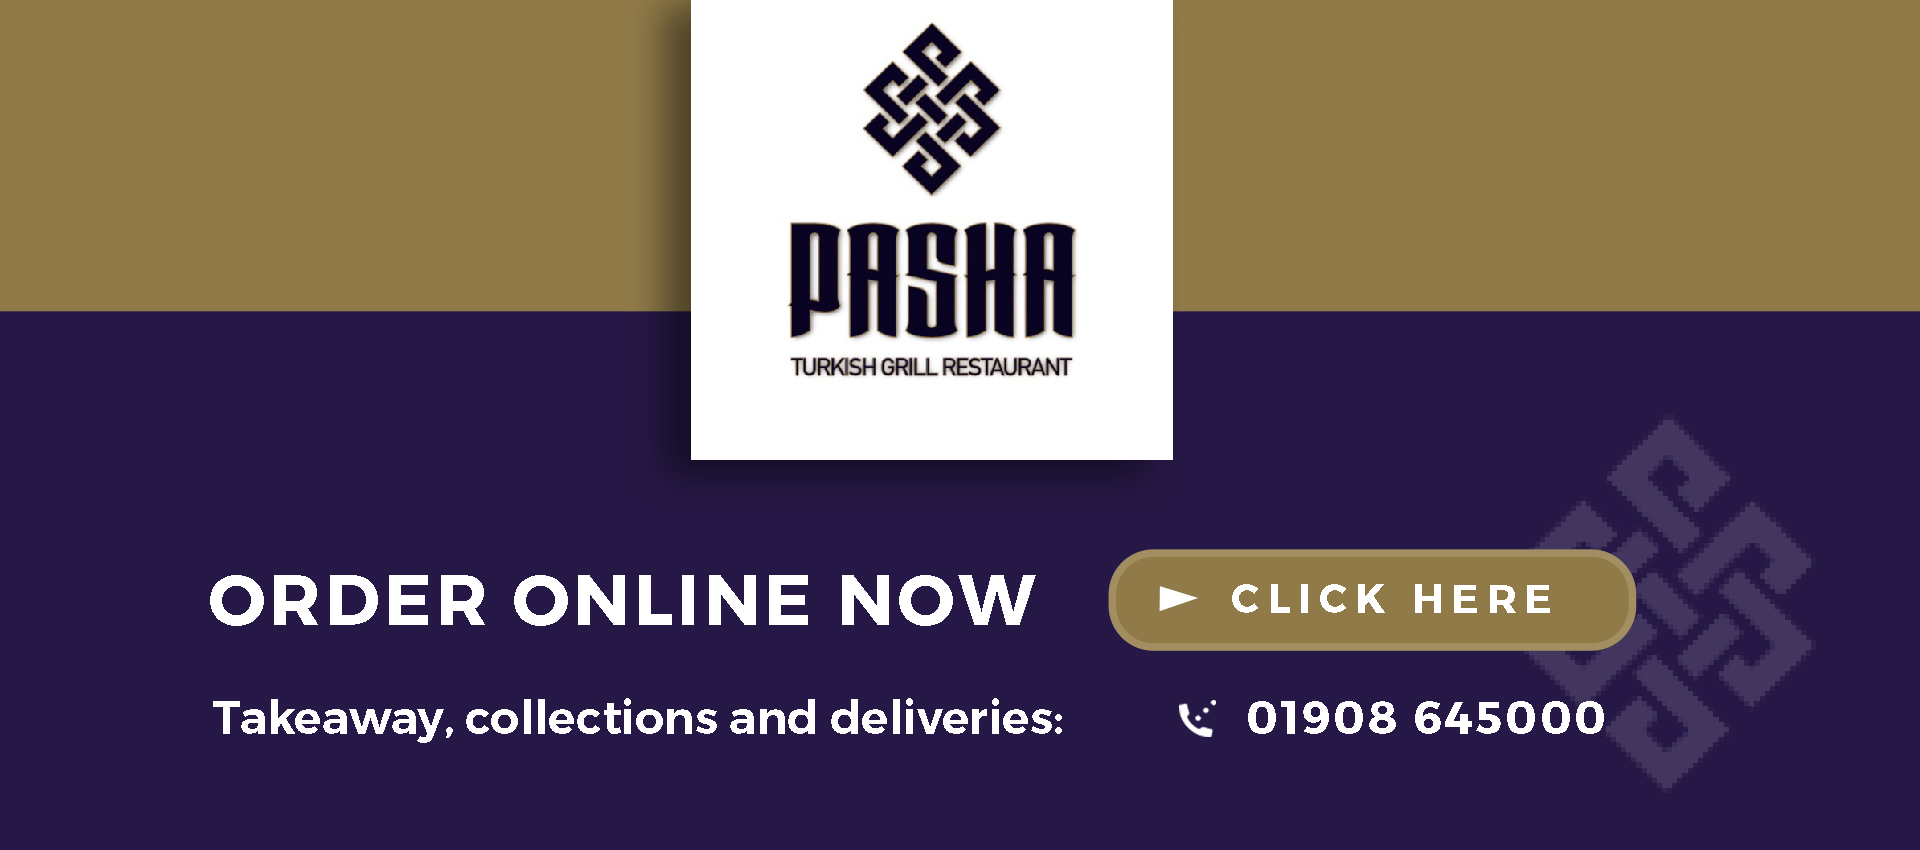 Order from Pasha Online Now